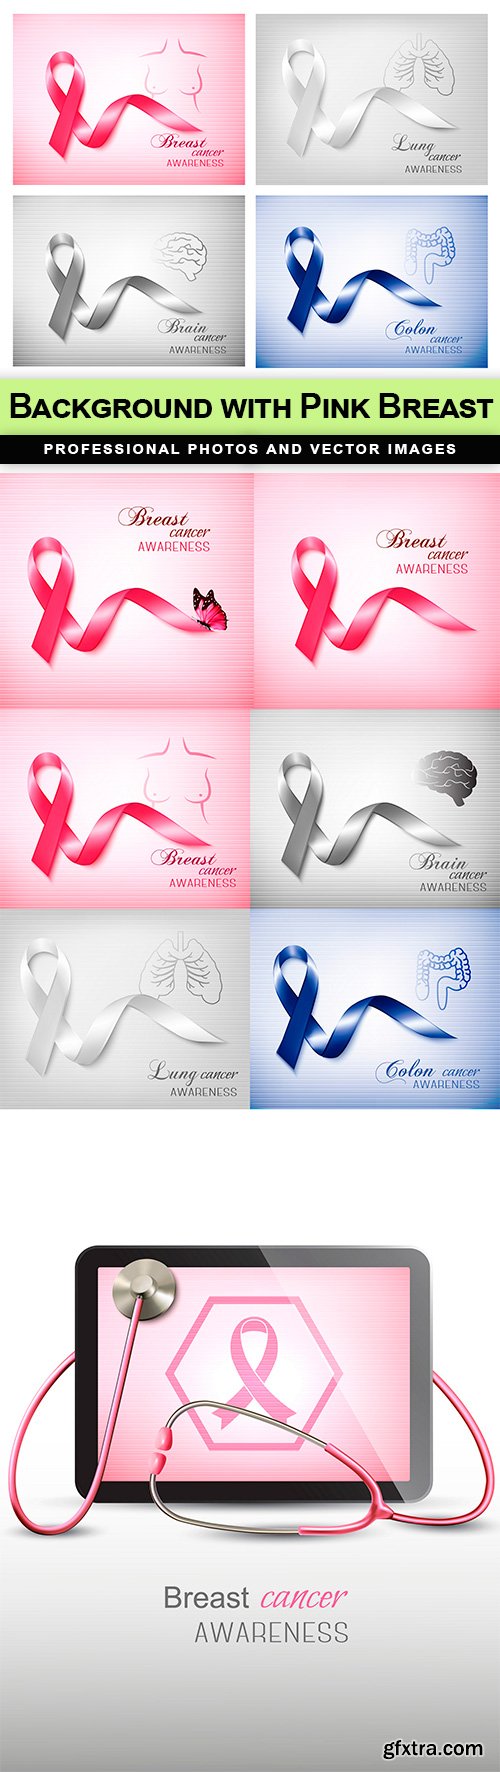 Background with Pink Breast - 8 EPS